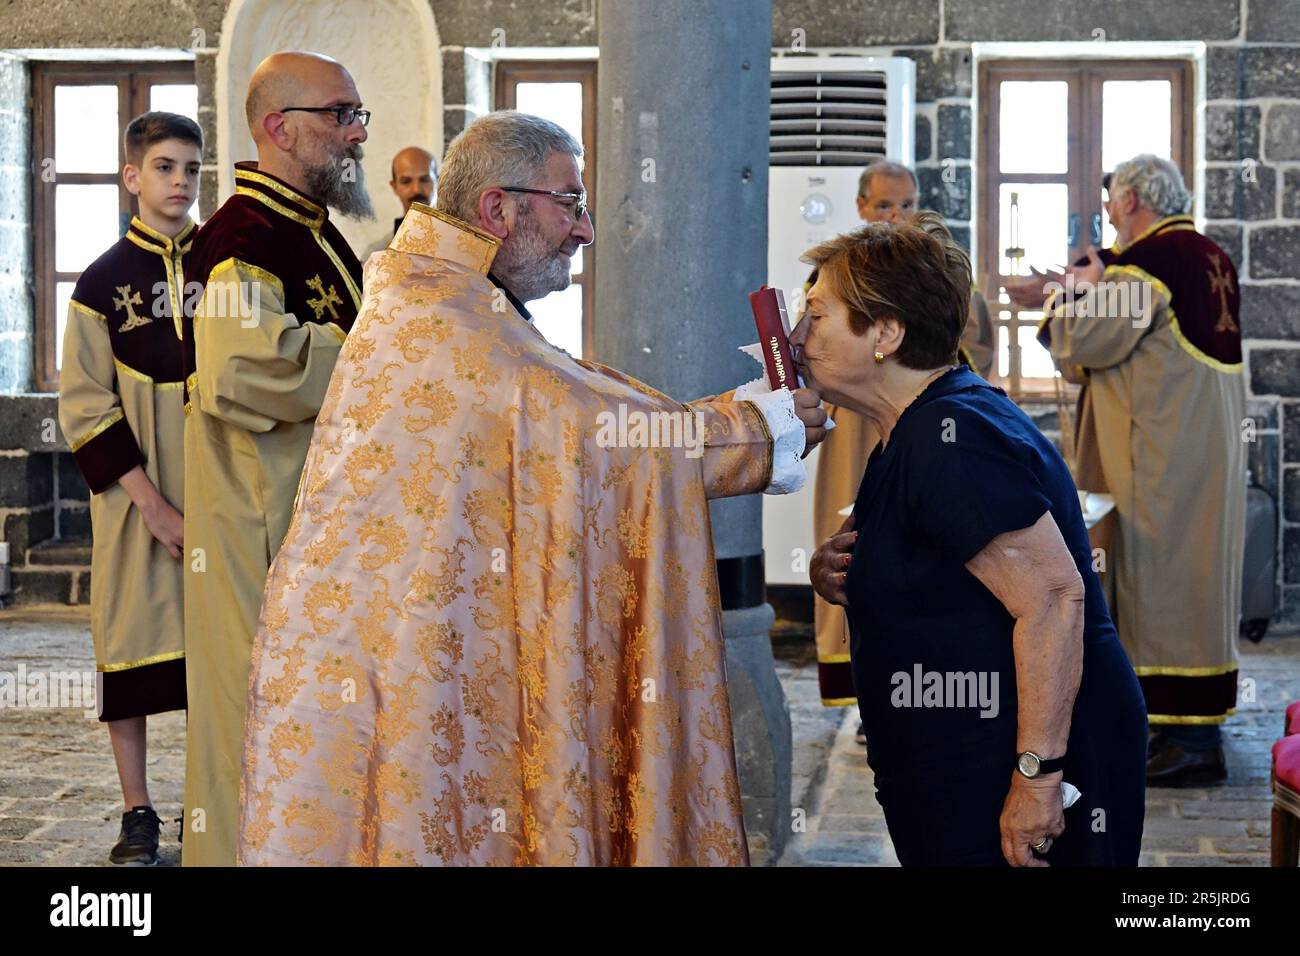 A woman kisses a Bible in the hands of Senior Priest Abraham Firat after the ritual at Diyarbak?r Surp Hovsep Church. At the Surp Hovsep Armenian Catholic Church, which was heavily damaged in clashes between armed Kurdish PKK militants and Turkish security forces in the center of Diyarbakir in 2015 and repaired as a result of a 4-year restoration, the second ritual in the last 100 years after the first ritual in 2021. Very few Armenians who came from Istanbul and lived in Diyarbakir attended the ceremony. The ritual was led by Senior Priest Abraham Firat and Subordinate Deacon Jan Acemoglu, wh Stock Photo